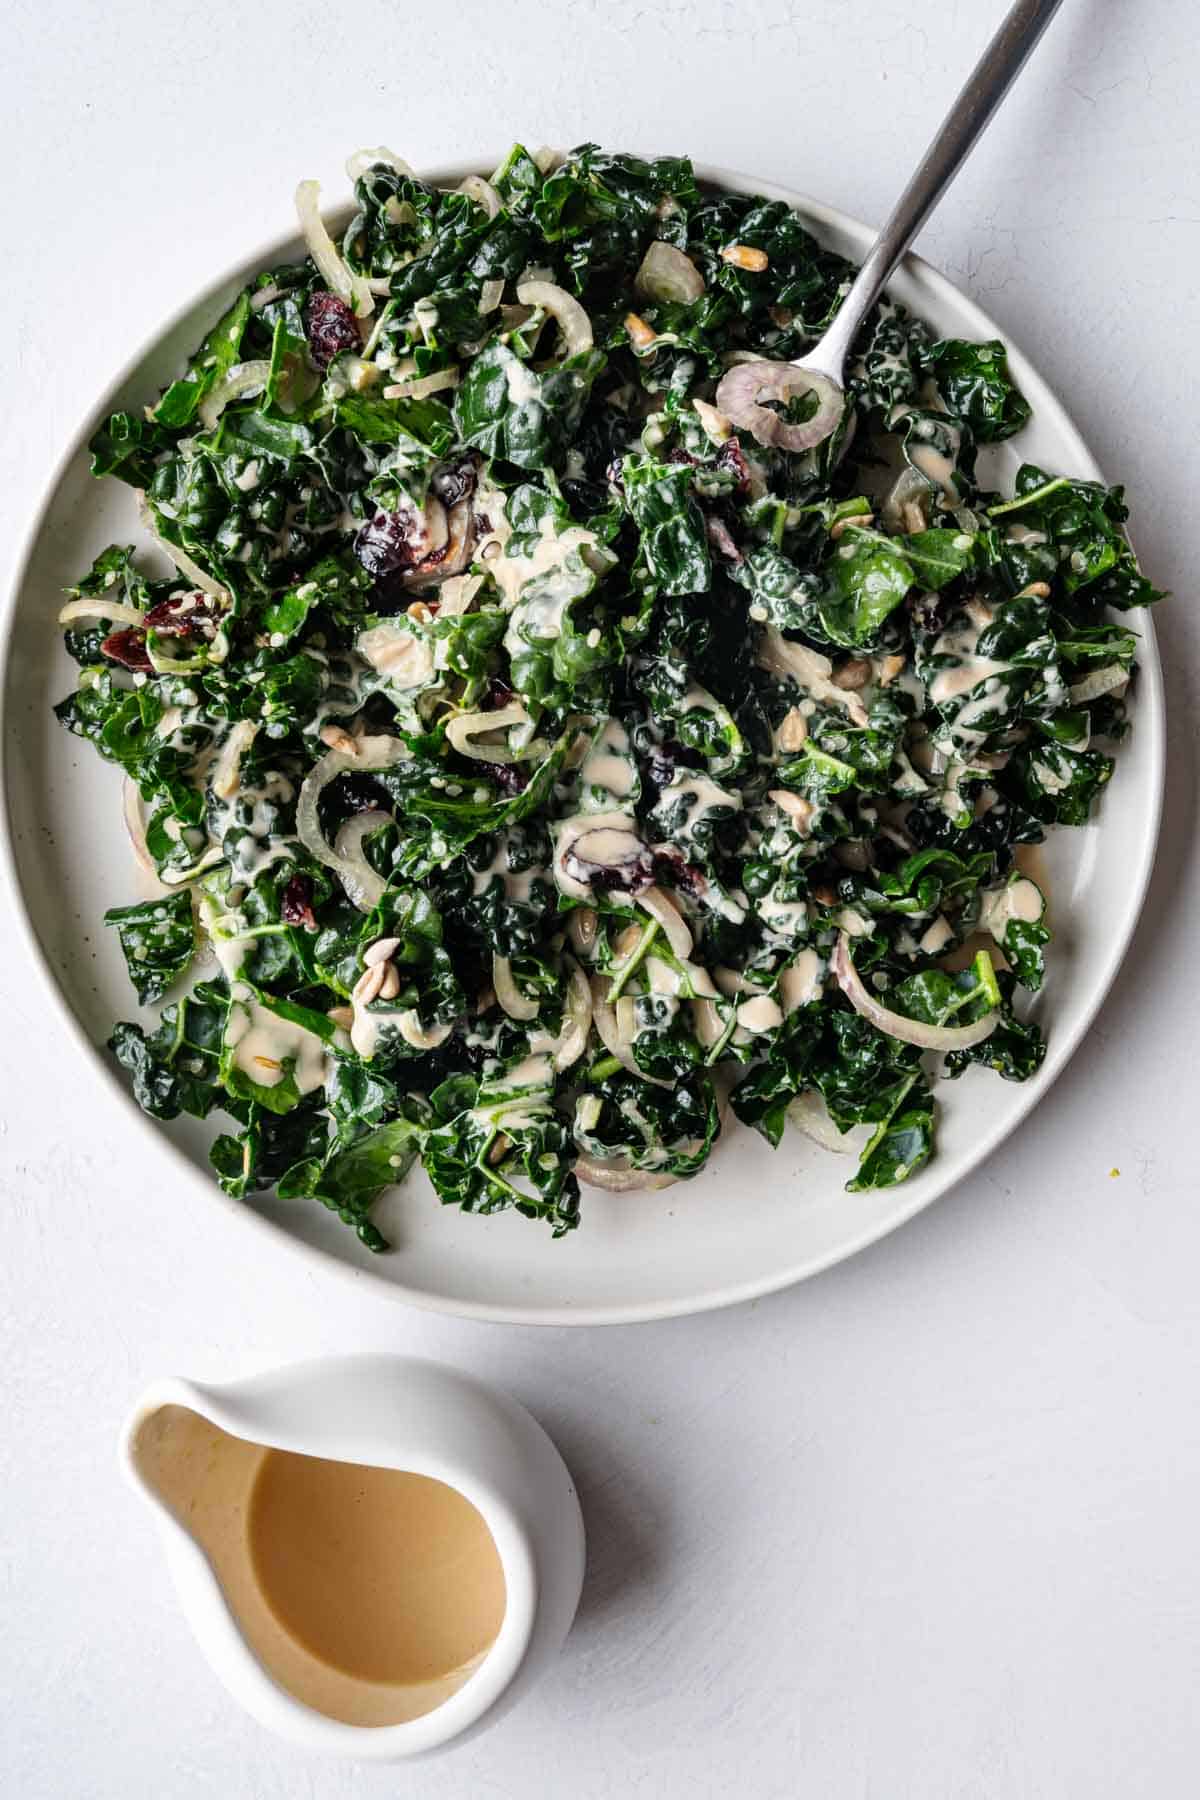 Kale salad with tahini dressing, sunflower seeds, shallots, and cranberries on a white plate with a silver fork.